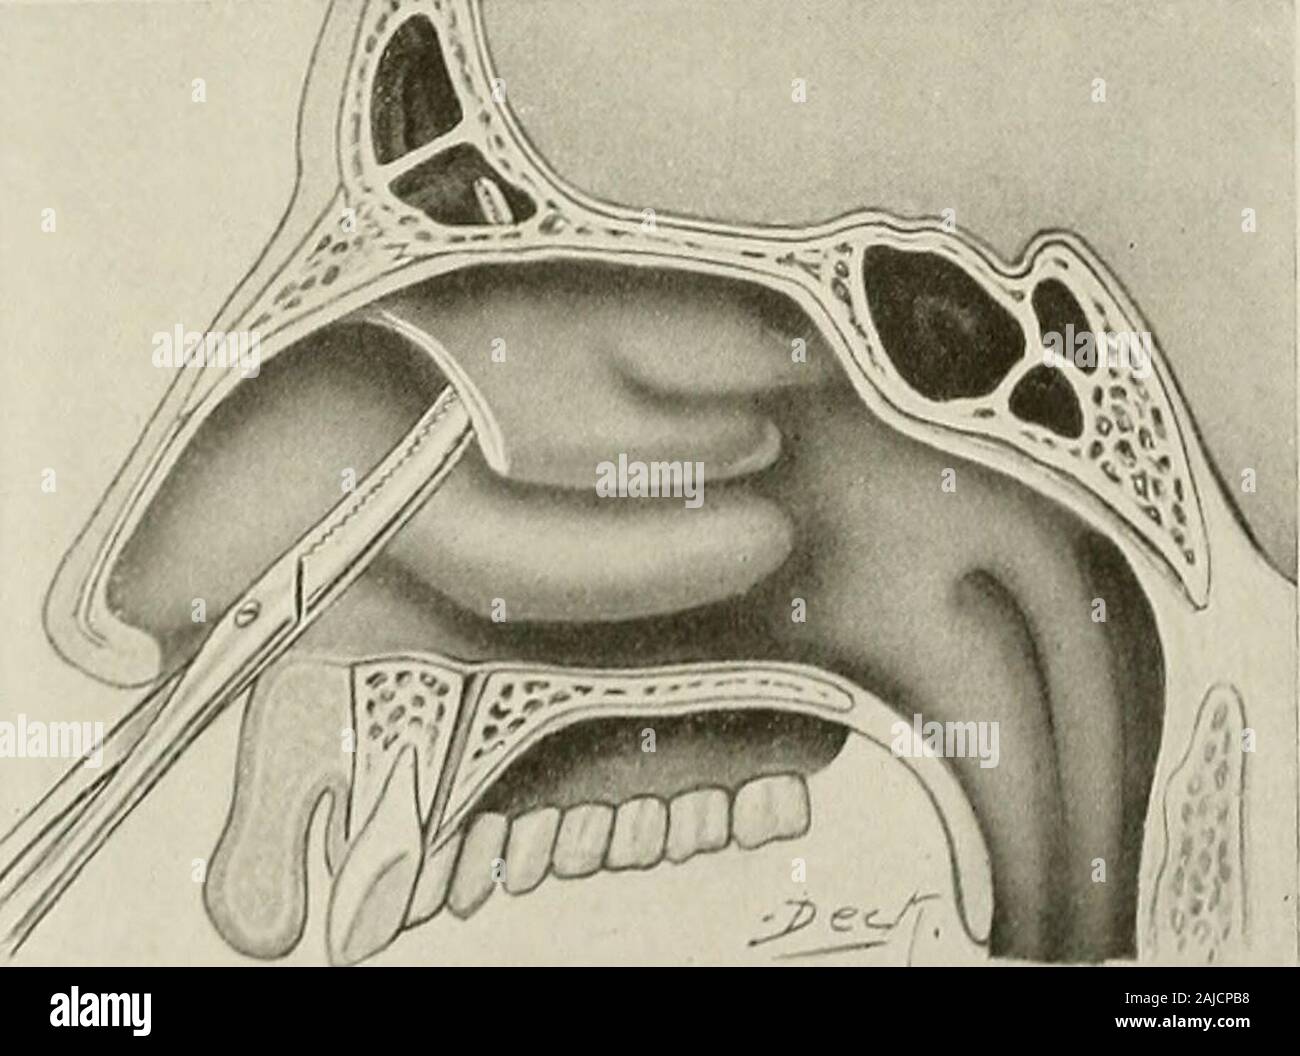 Surgical treatment; a practical treatise on the therapy of surgical diseases for the use of practitioners and students of surgery . Fig. 864.—Nasal Approach to Frontal Sinus. The anterior end of the middle turbinate has been removed, and the forceps are cutting away the anterior ethmoidal cells. outer margins of the orbit inward along the upper margin to the root of thenose, lying wholly in the area of the eyebrow. The incision then passesdownward upon the nasal process of the superior maxilla, following themargin of the orbit, and curves outward to end below the inner canthus. Fig. 865.—Nasal Stock Photo